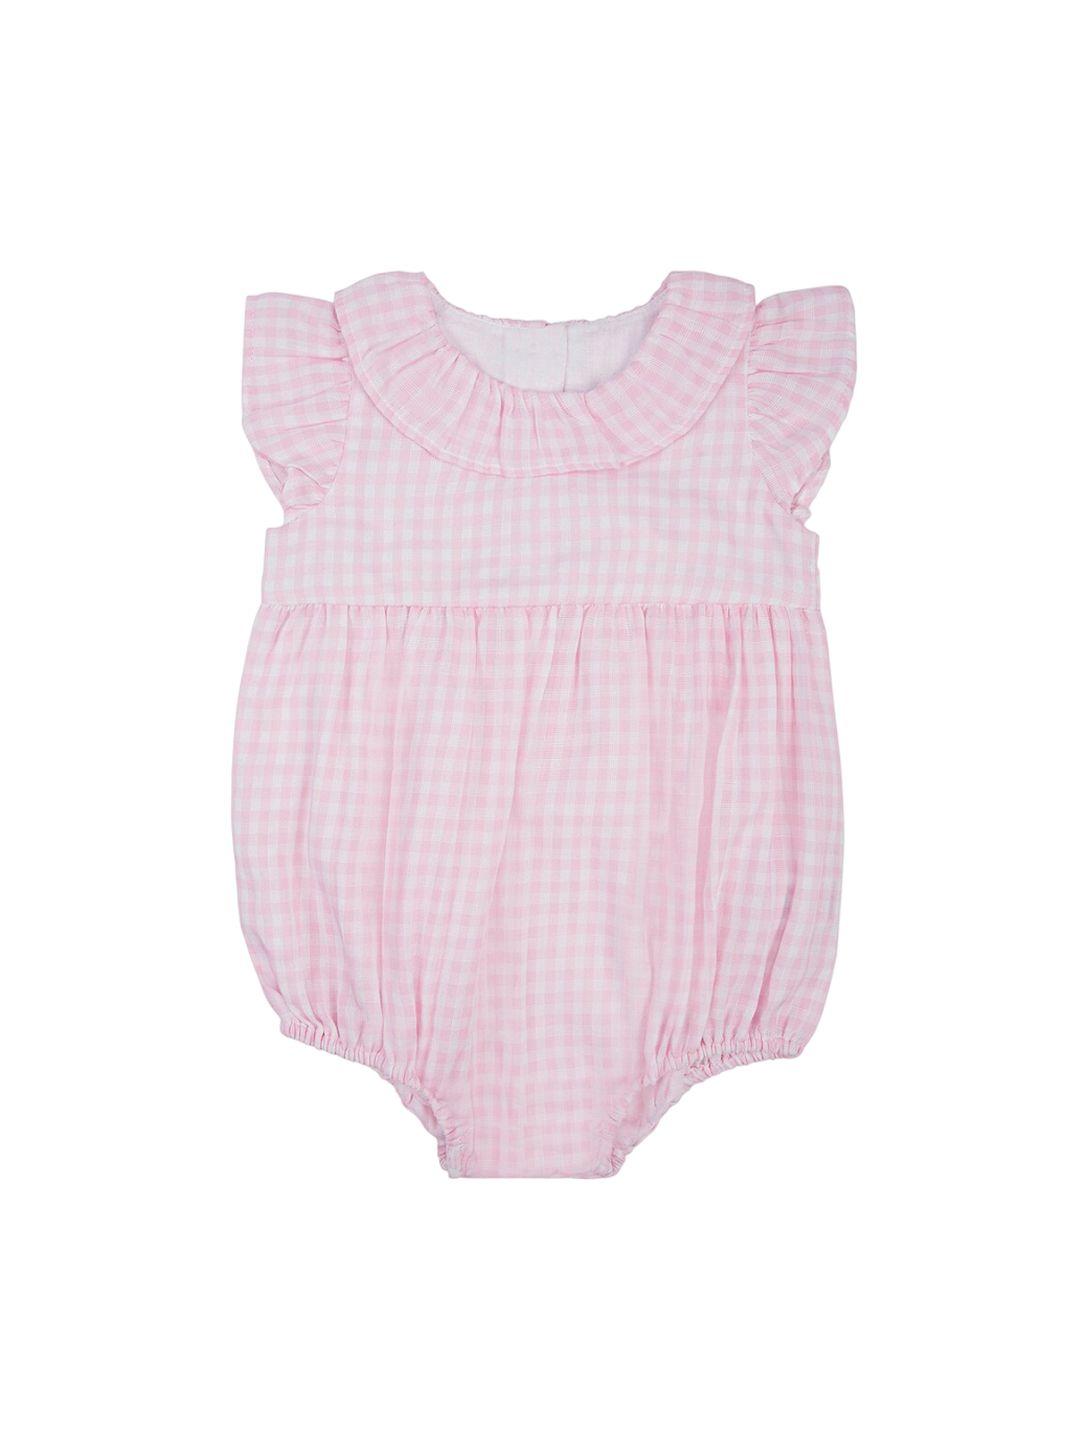 haus-&-kinder-infant-girls-printed-pure-checked-rompers